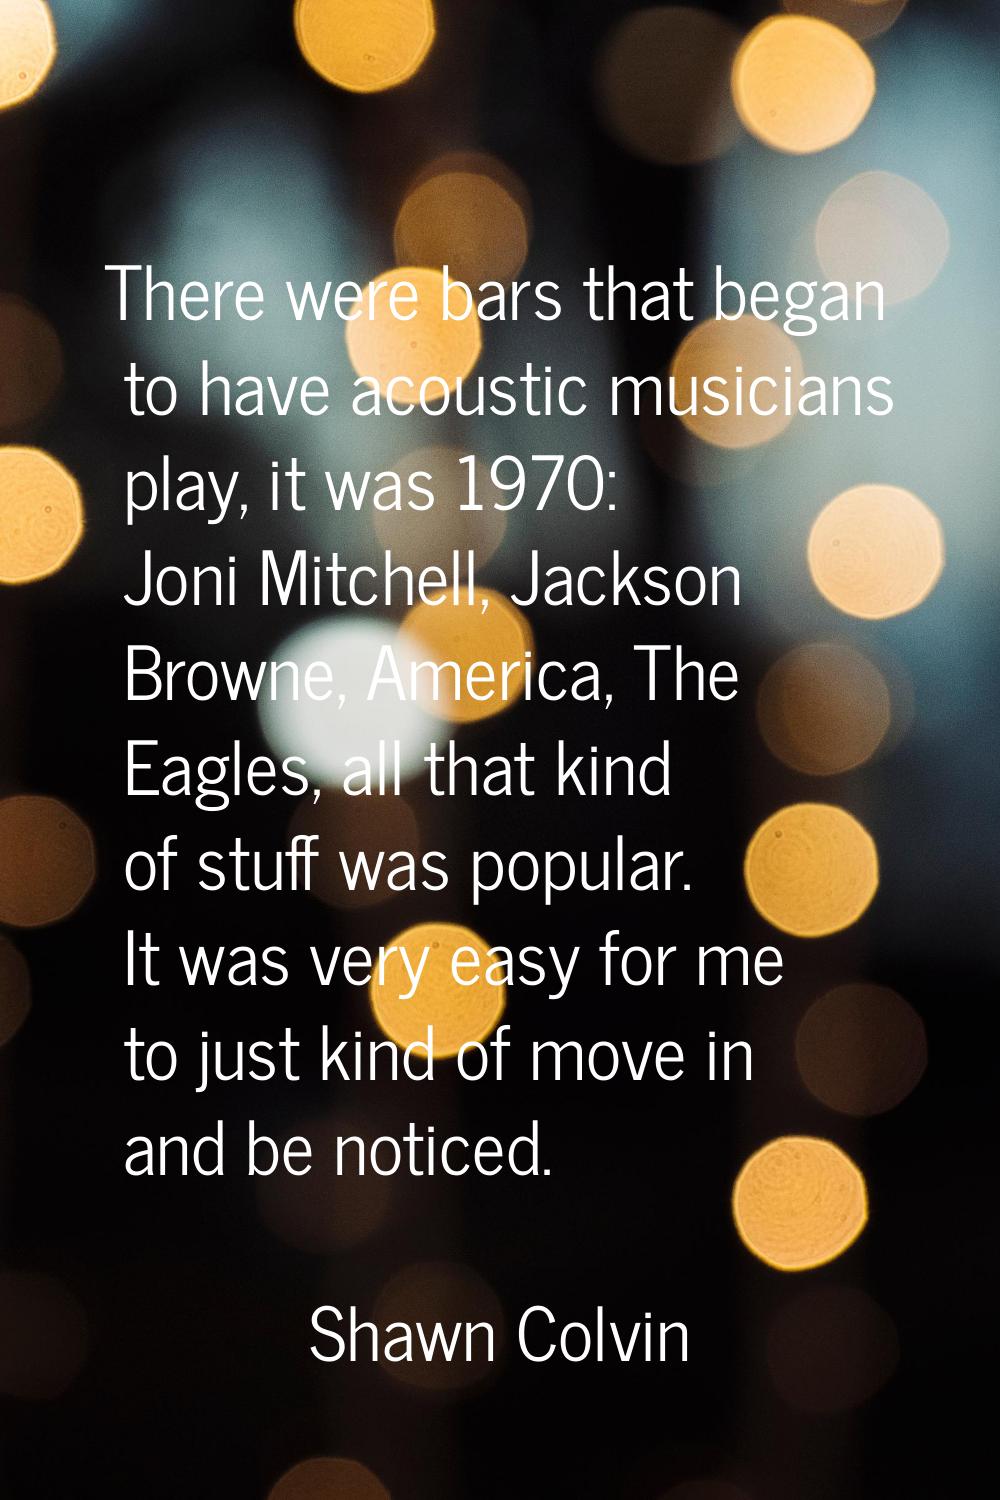 There were bars that began to have acoustic musicians play, it was 1970: Joni Mitchell, Jackson Bro